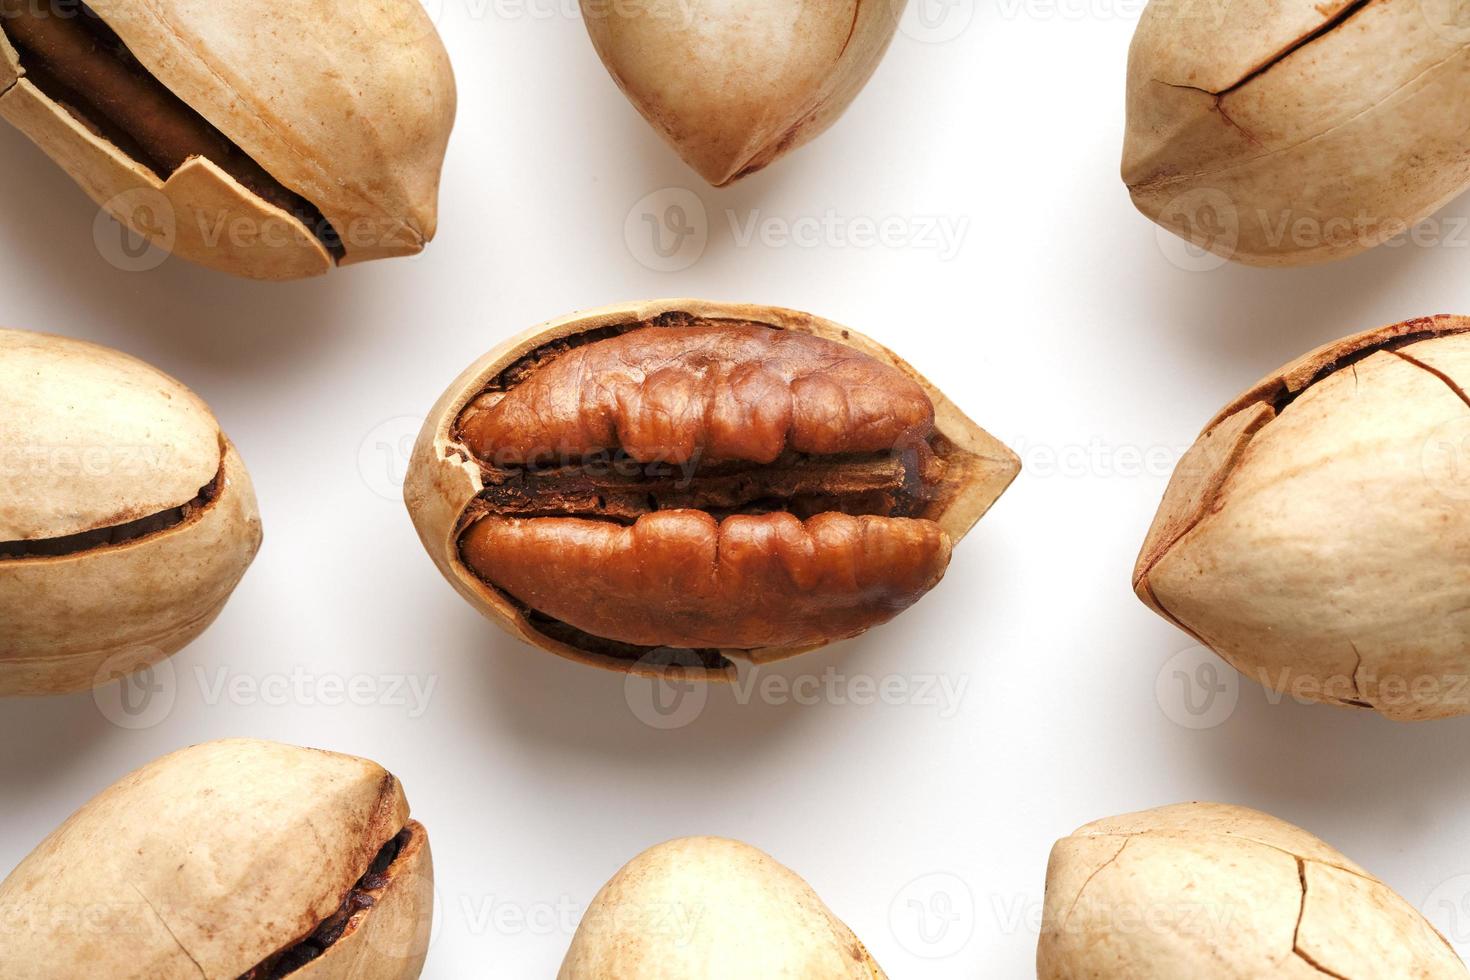 Purified Pecan isolated in the center on white background. photo